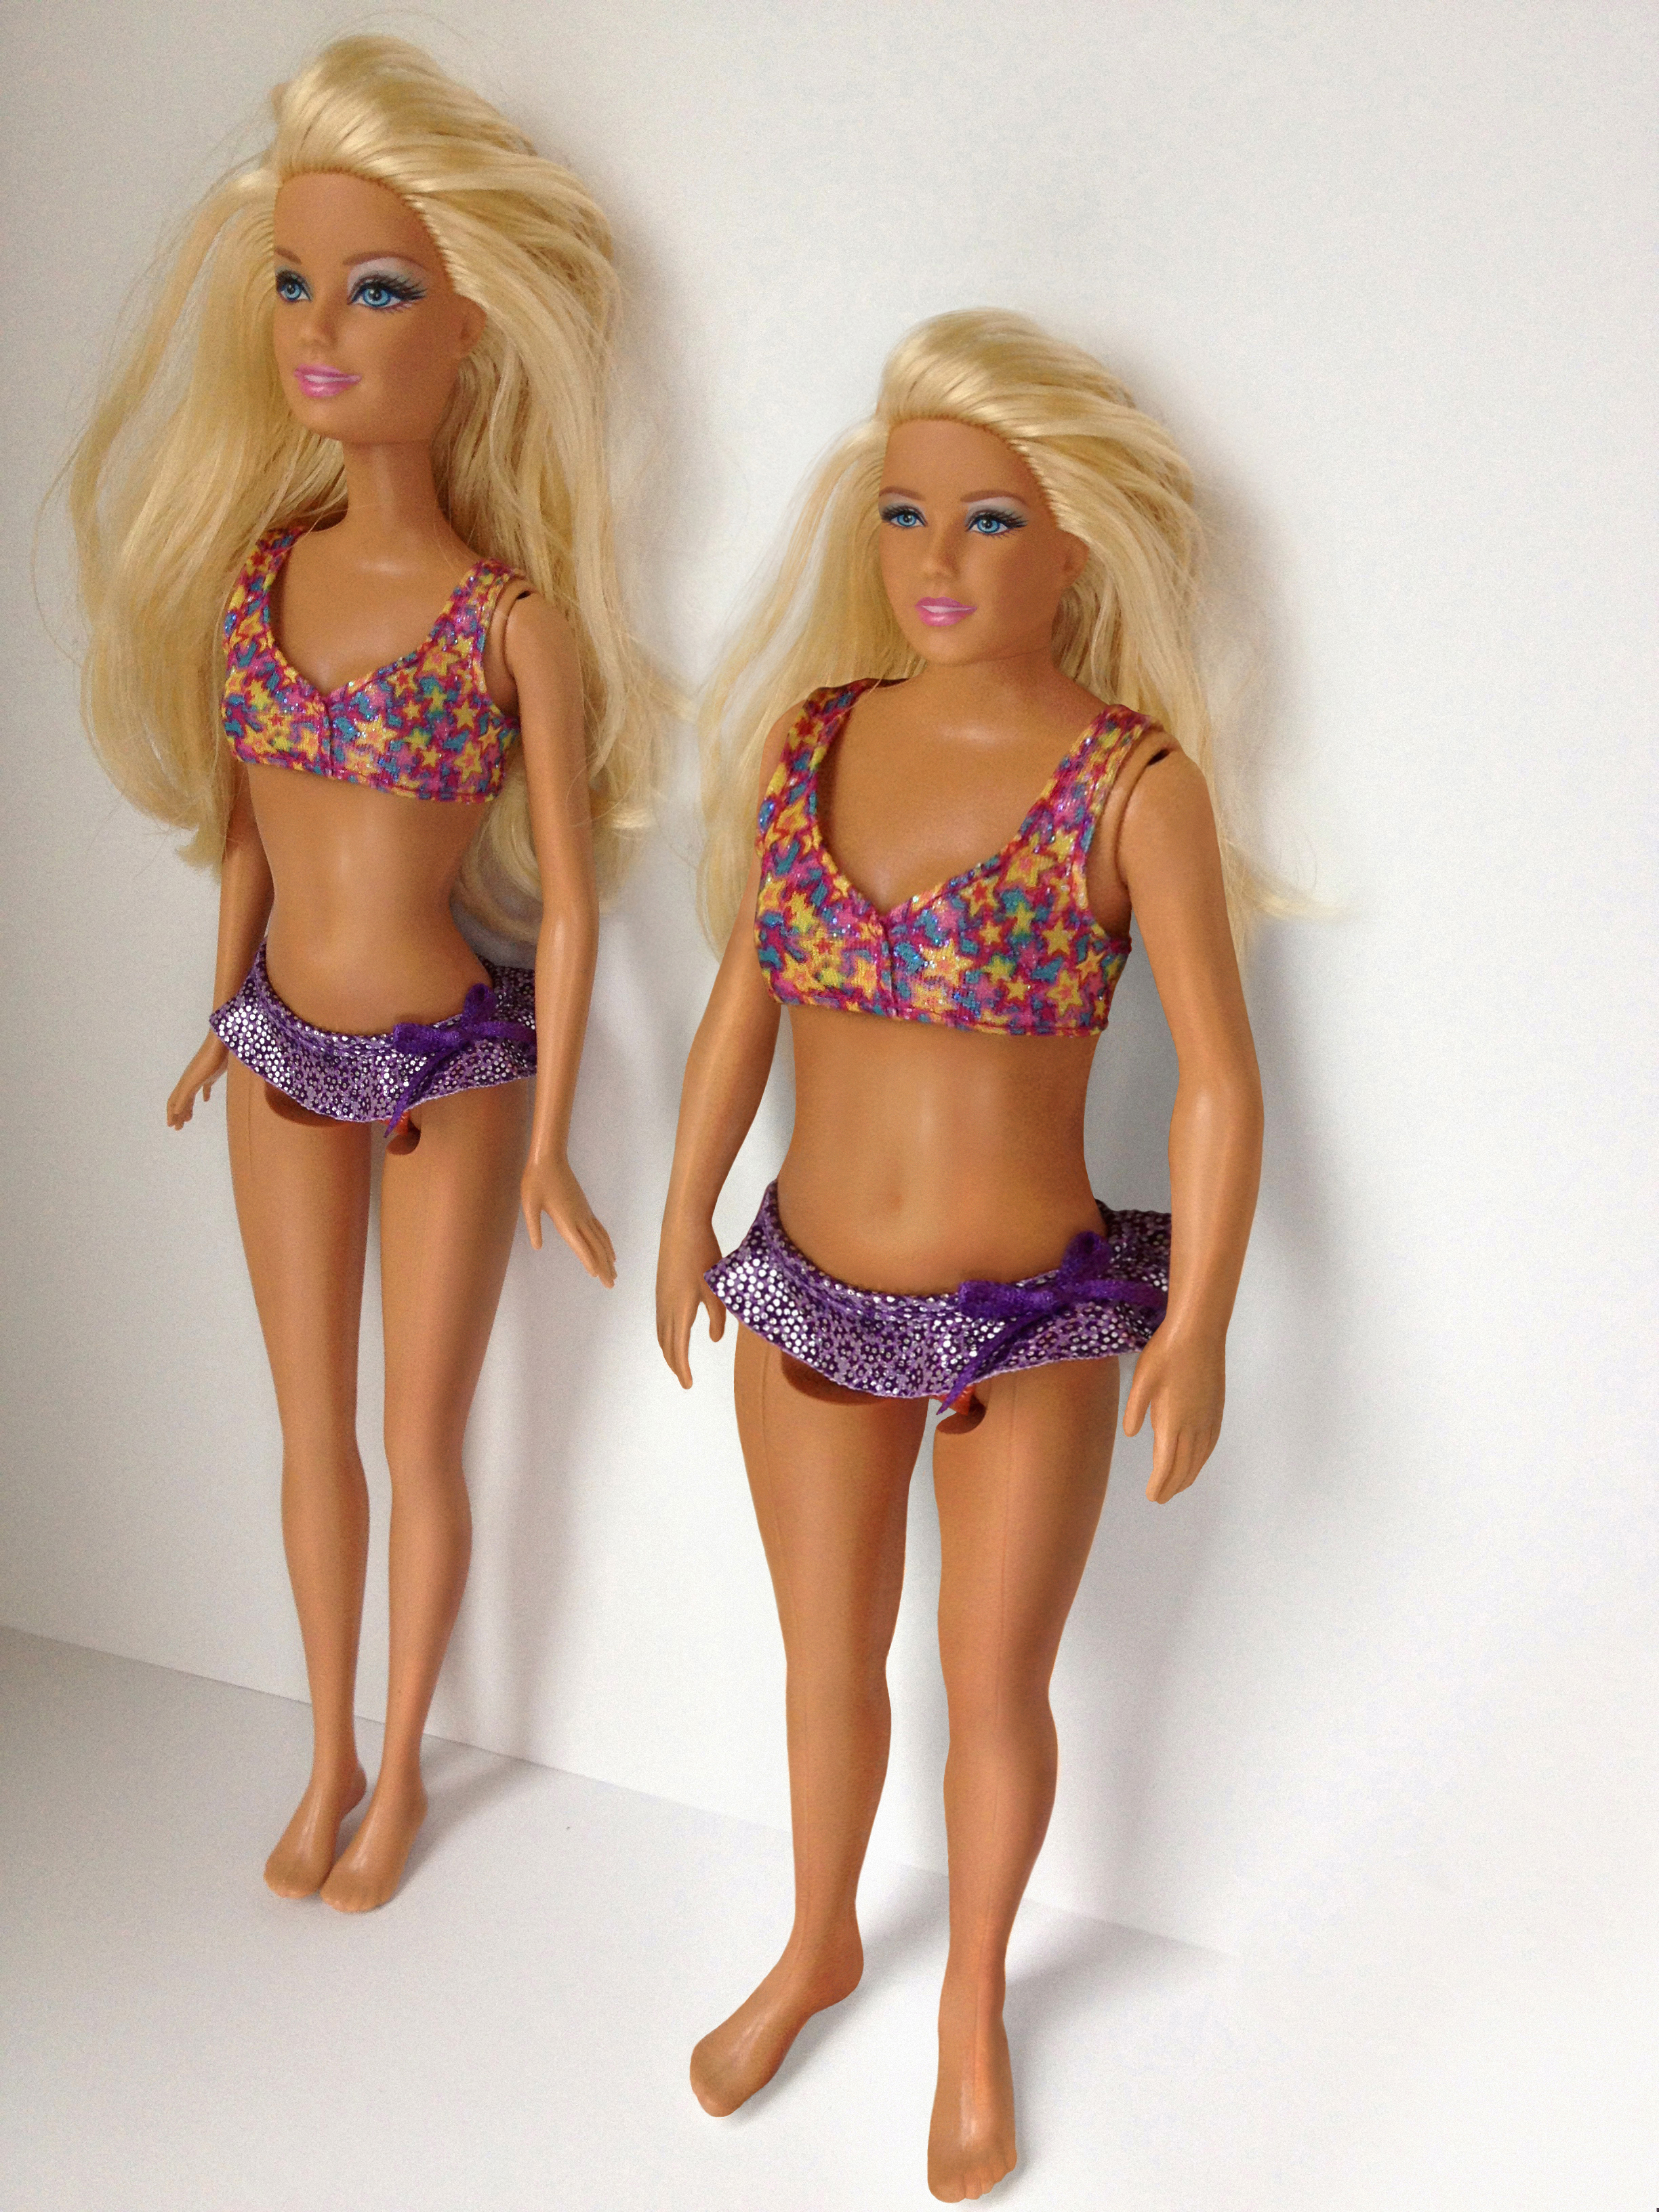 barbie normal size